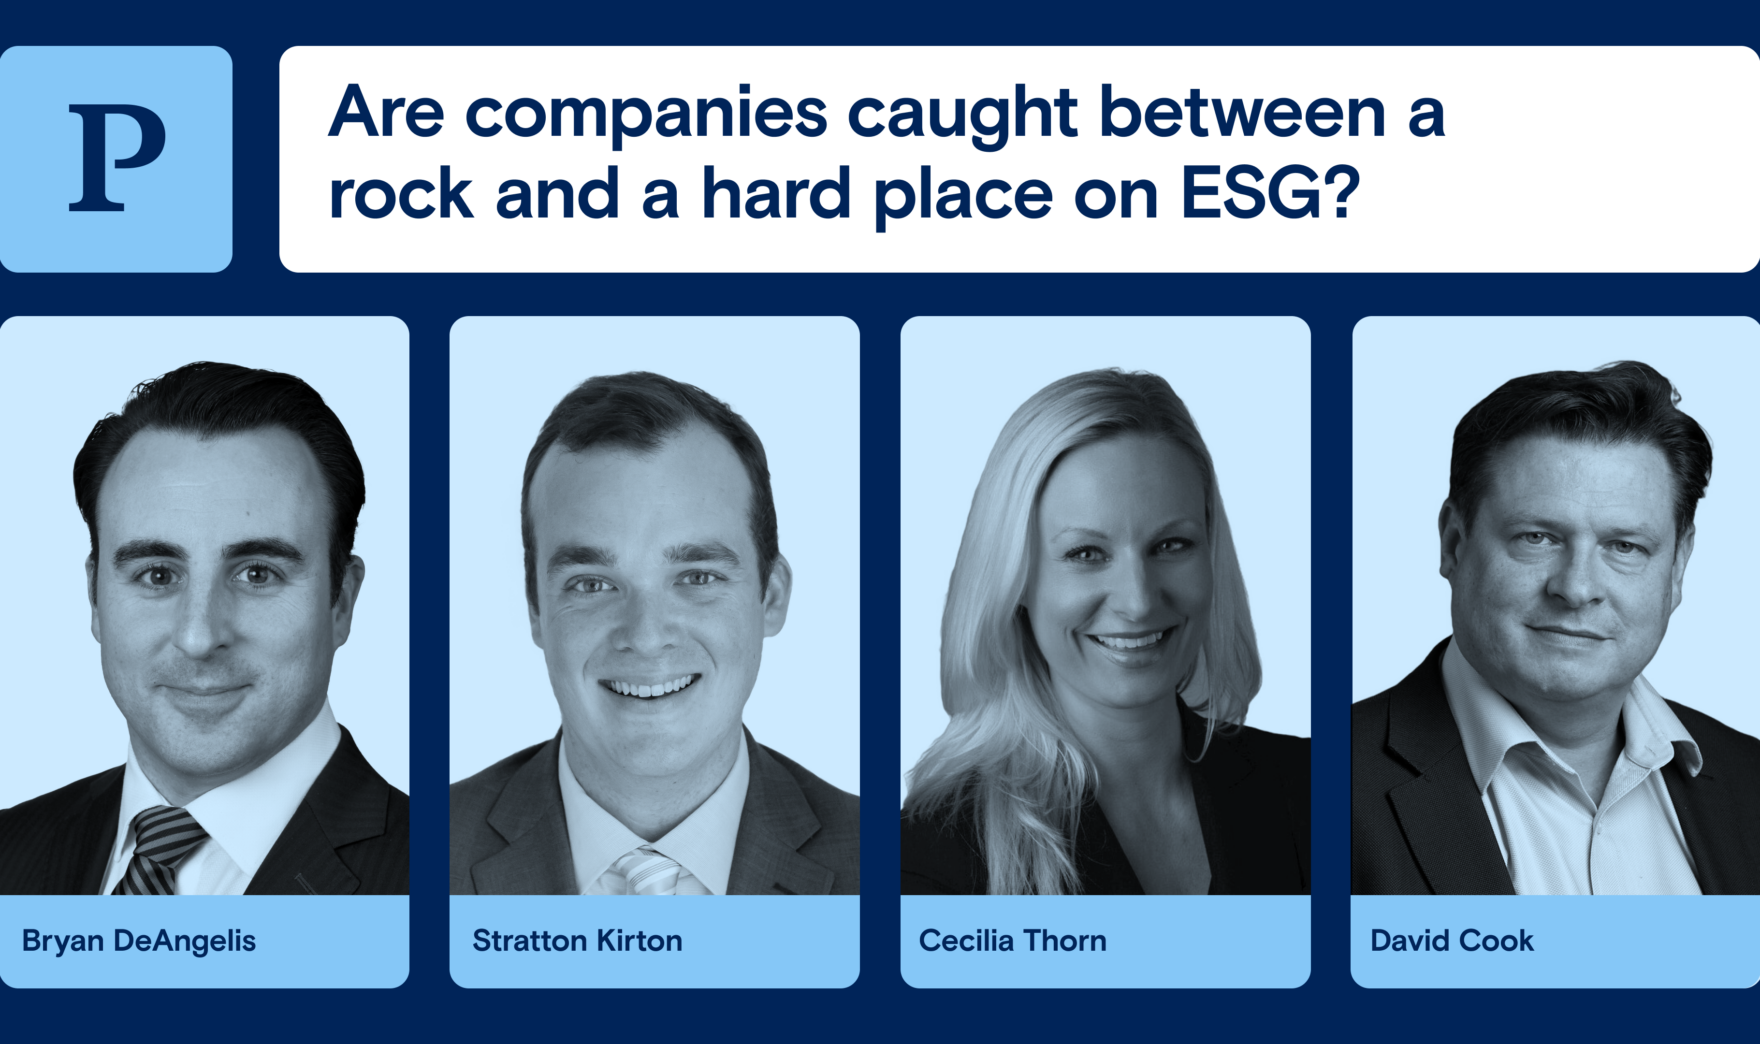 Are companies caught between a rock and a hard place on ESG?